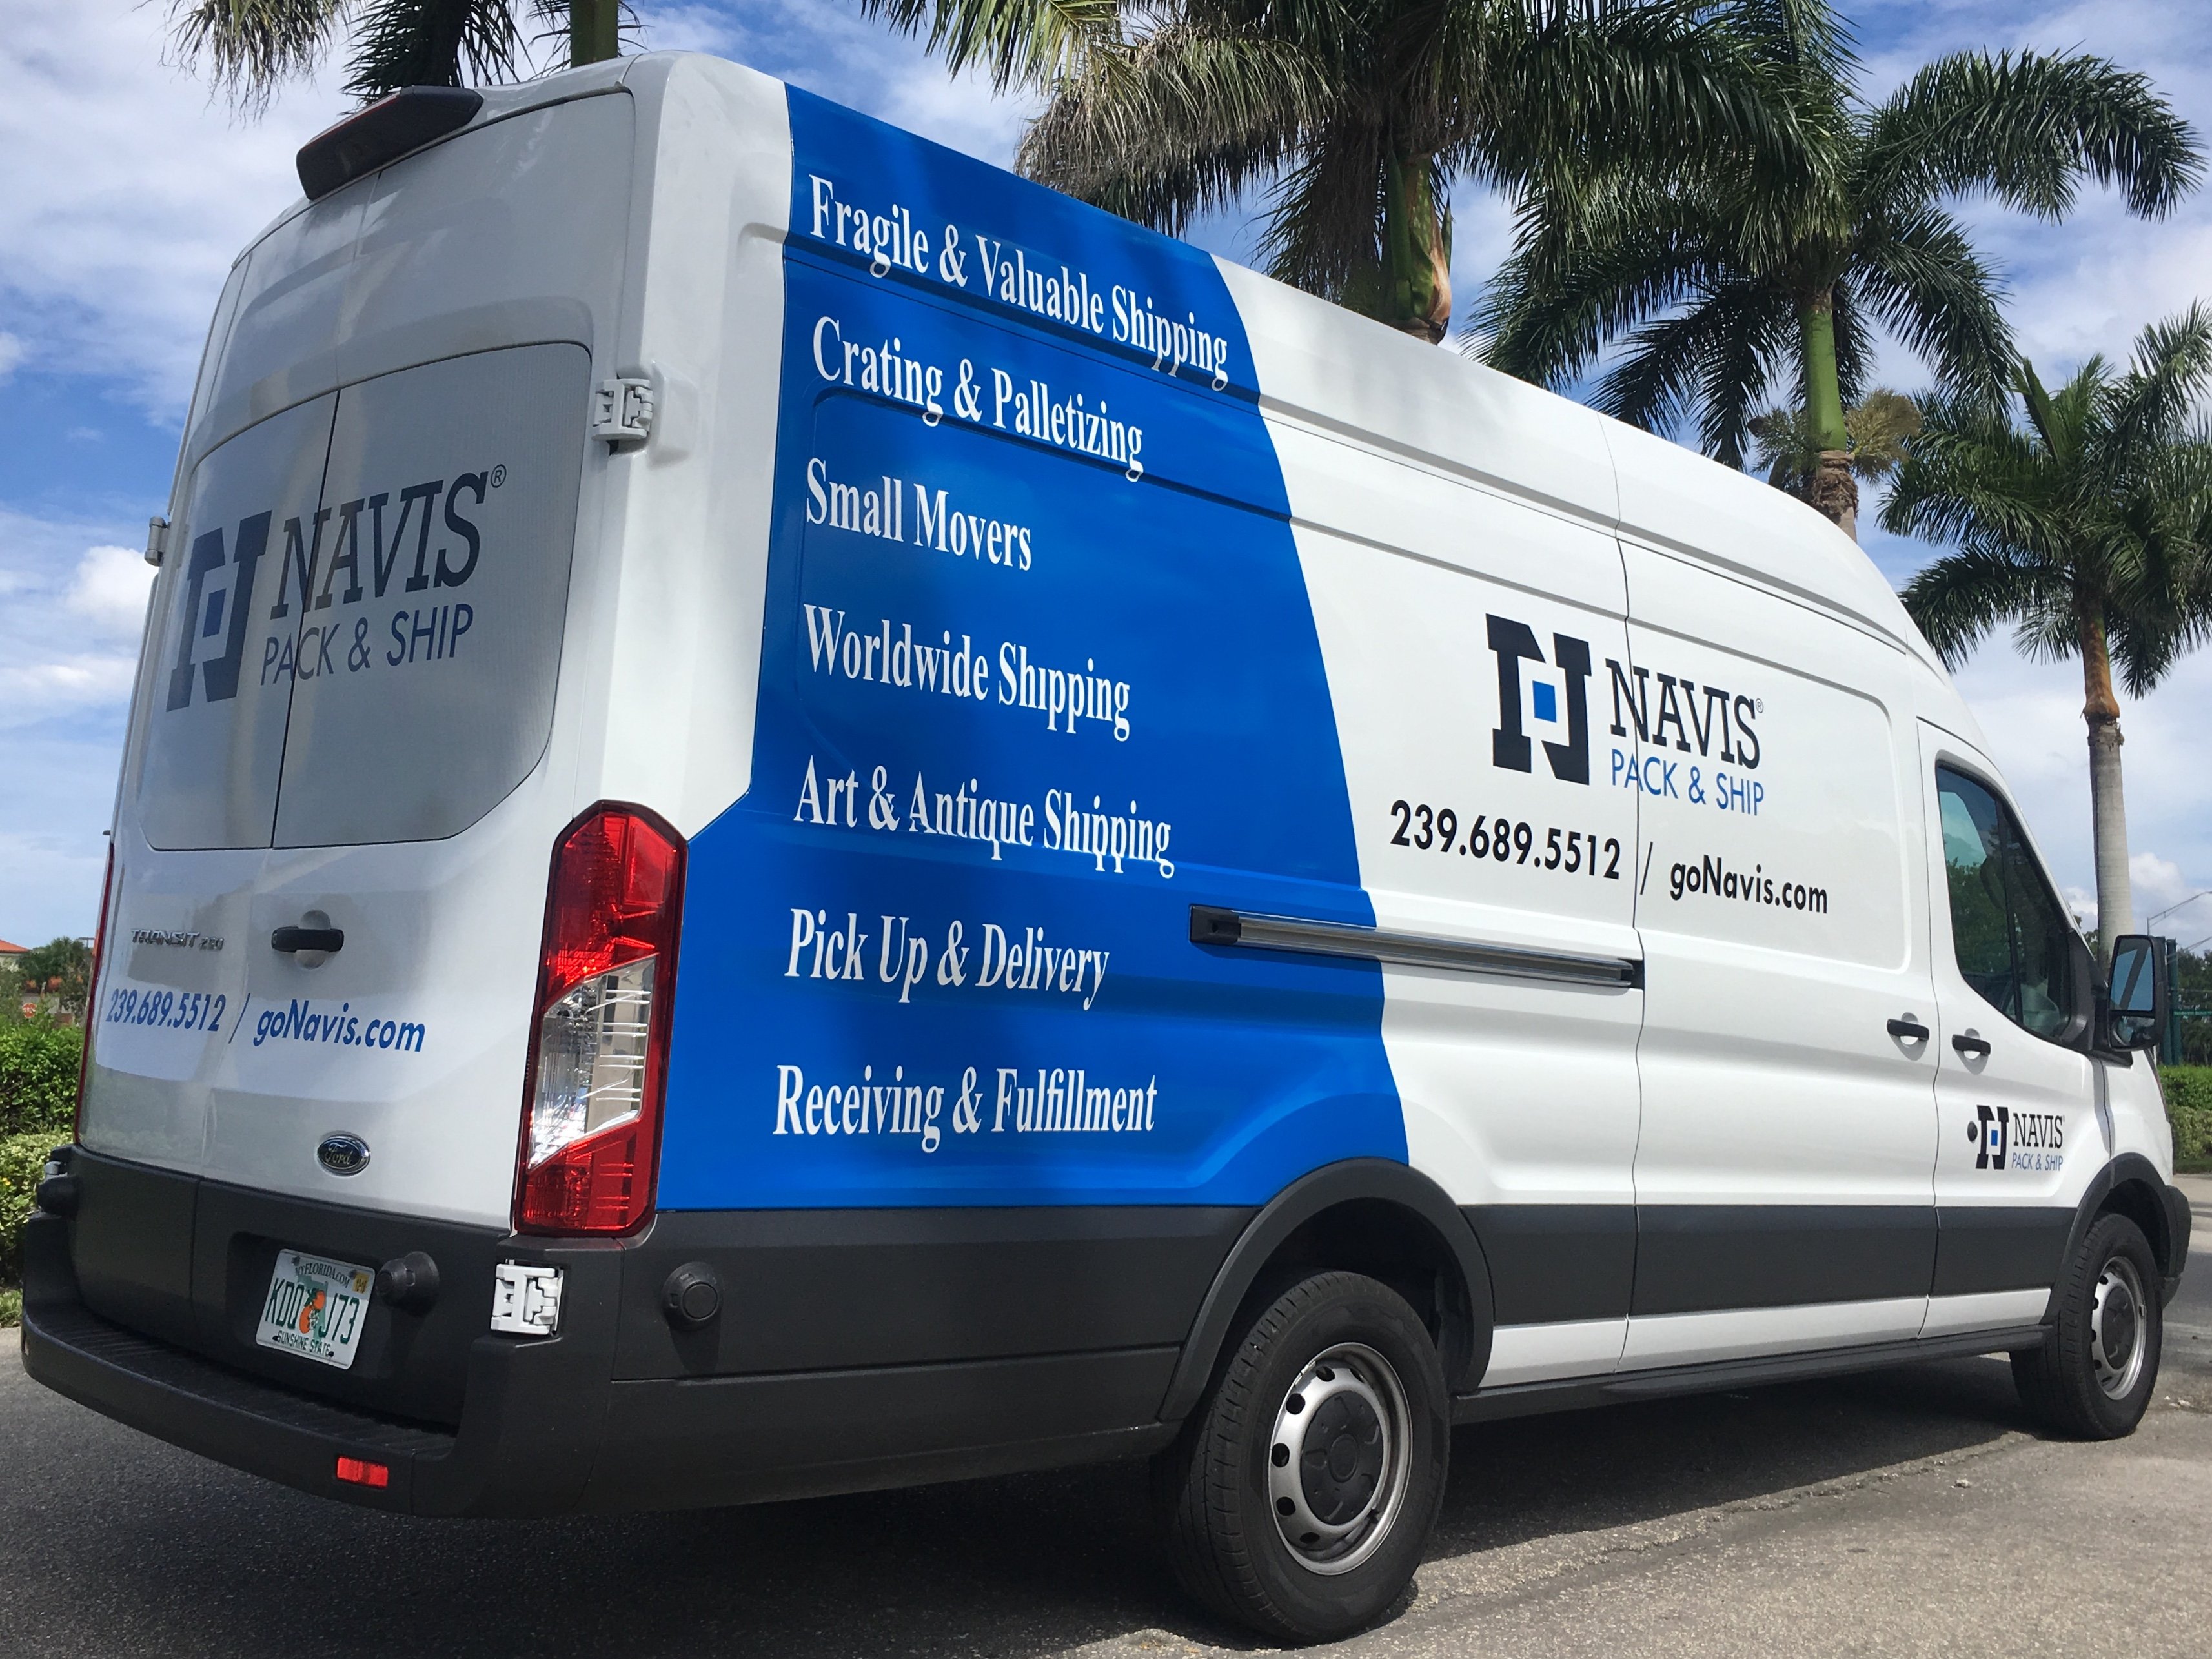 Pack and Ship Services in Tampa, St. Petersburg, Clearwater and South Florida